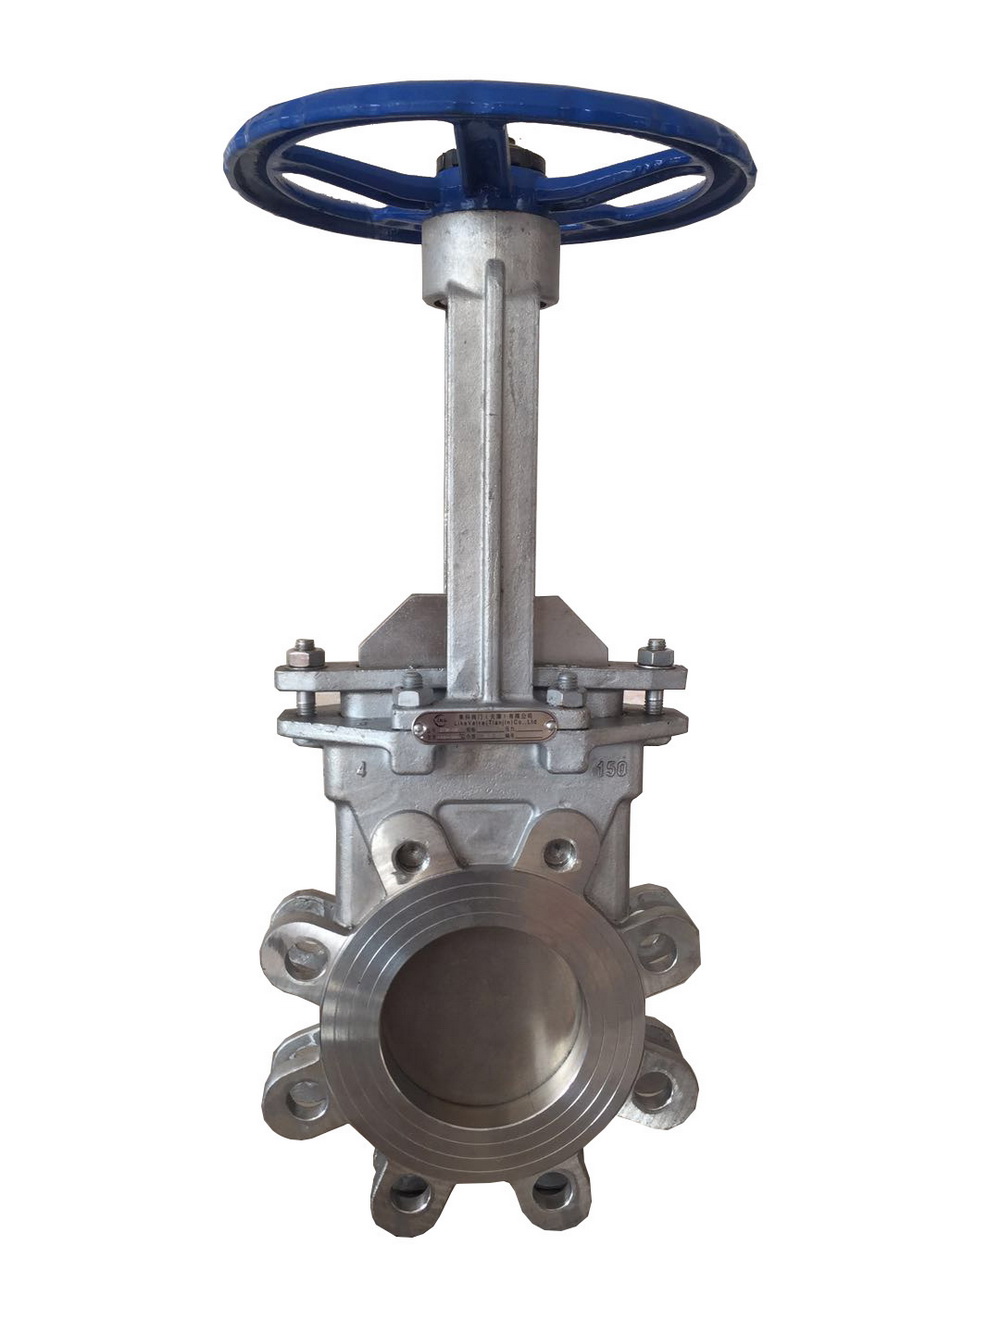 China gate valve price overview: Different types, specifications of the price difference